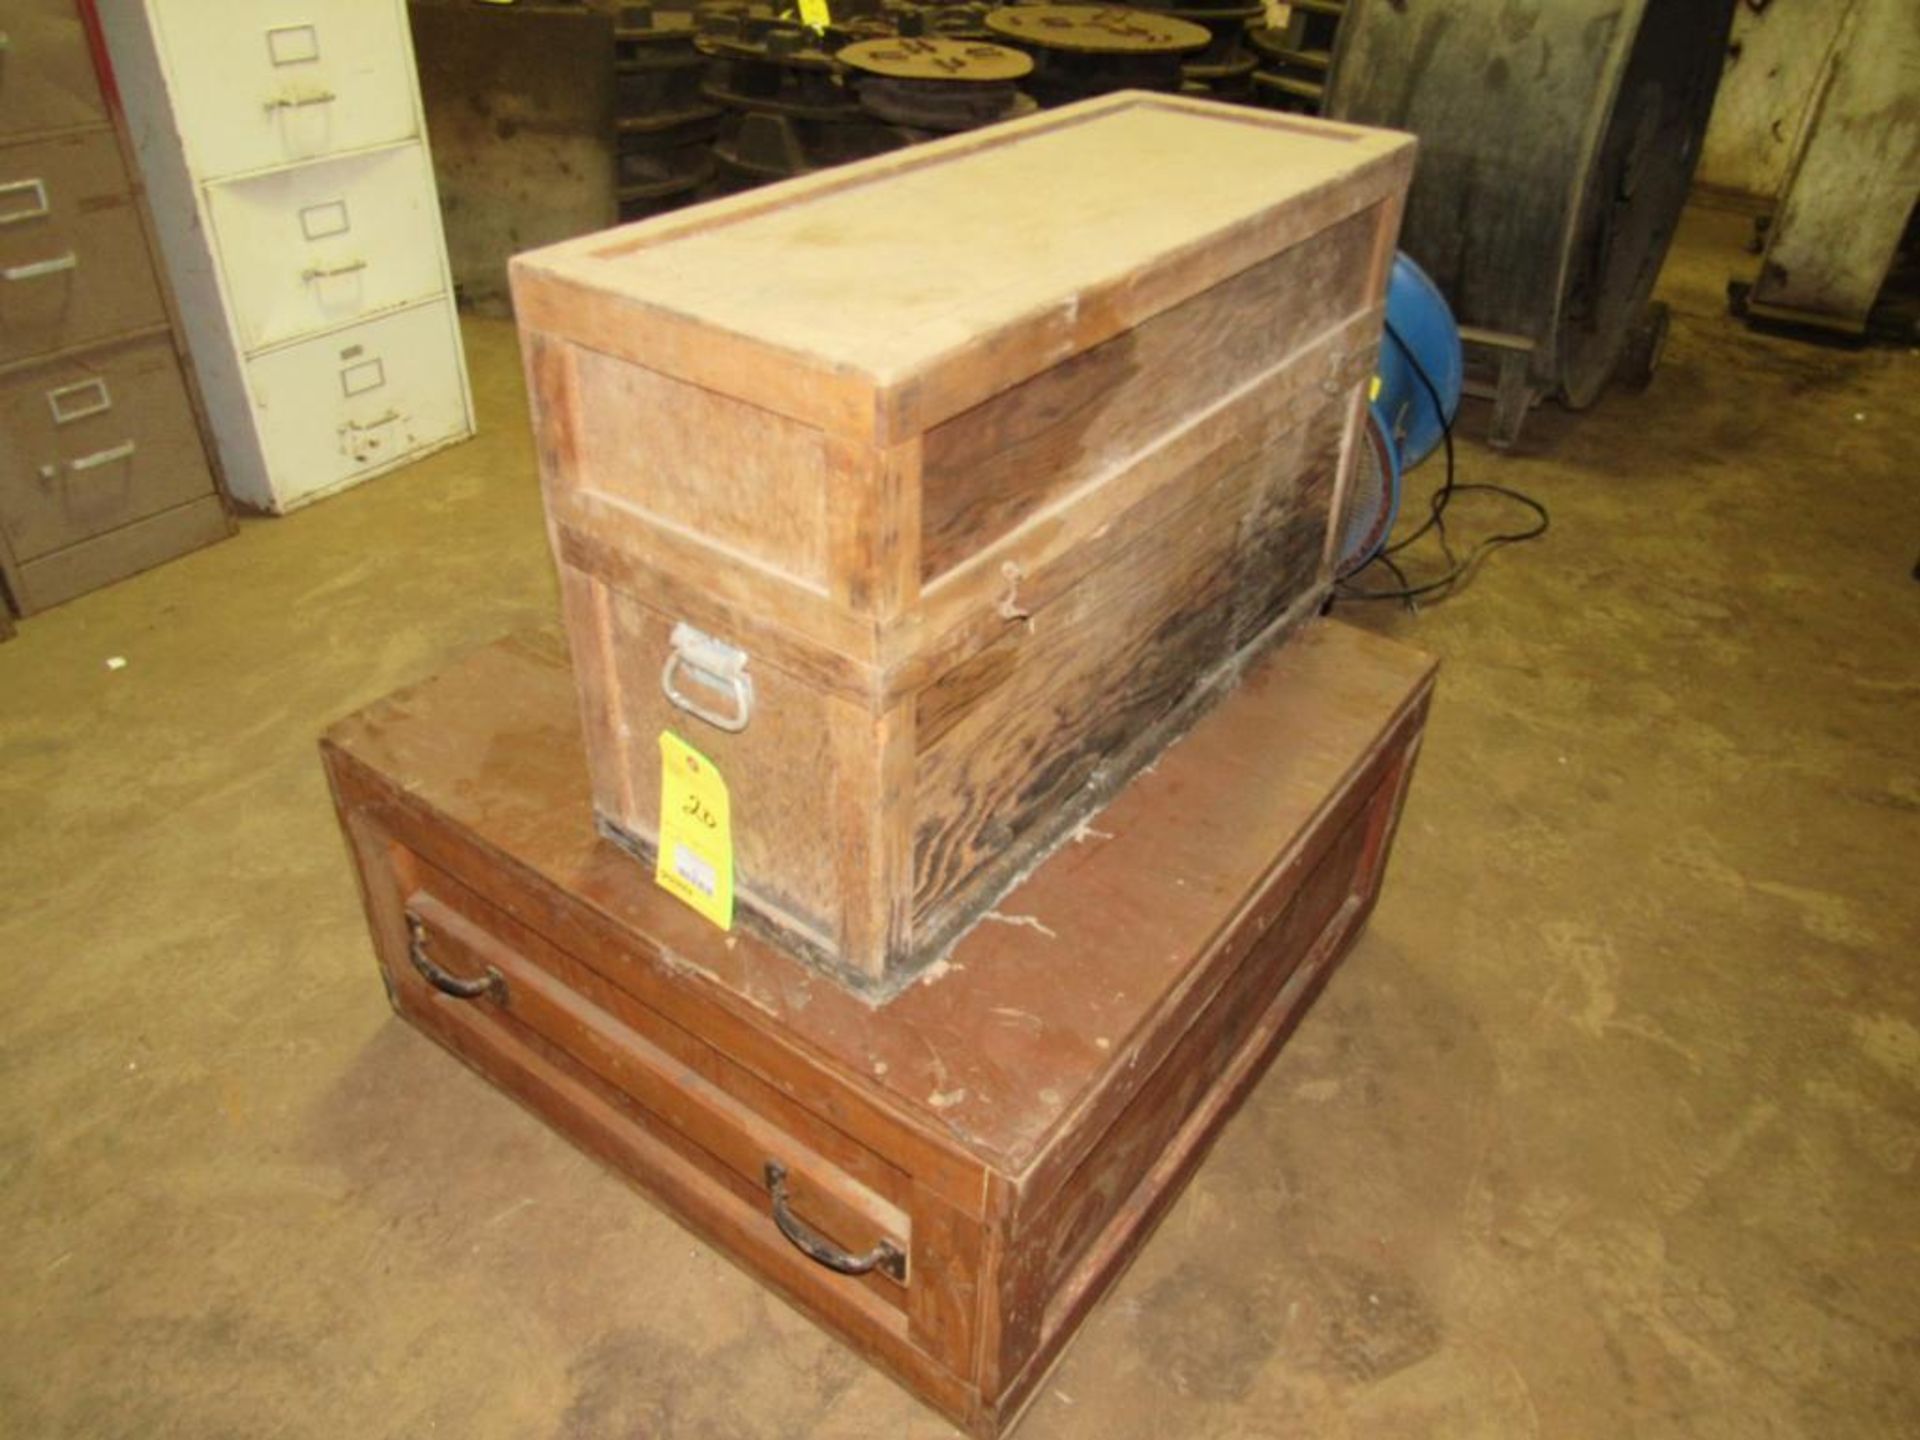 Lot of 2 Wooden Chests, No Contents: (1) 32" x 32" x 15" H, (1) 31" x 12.5" x 20" H - Image 4 of 4